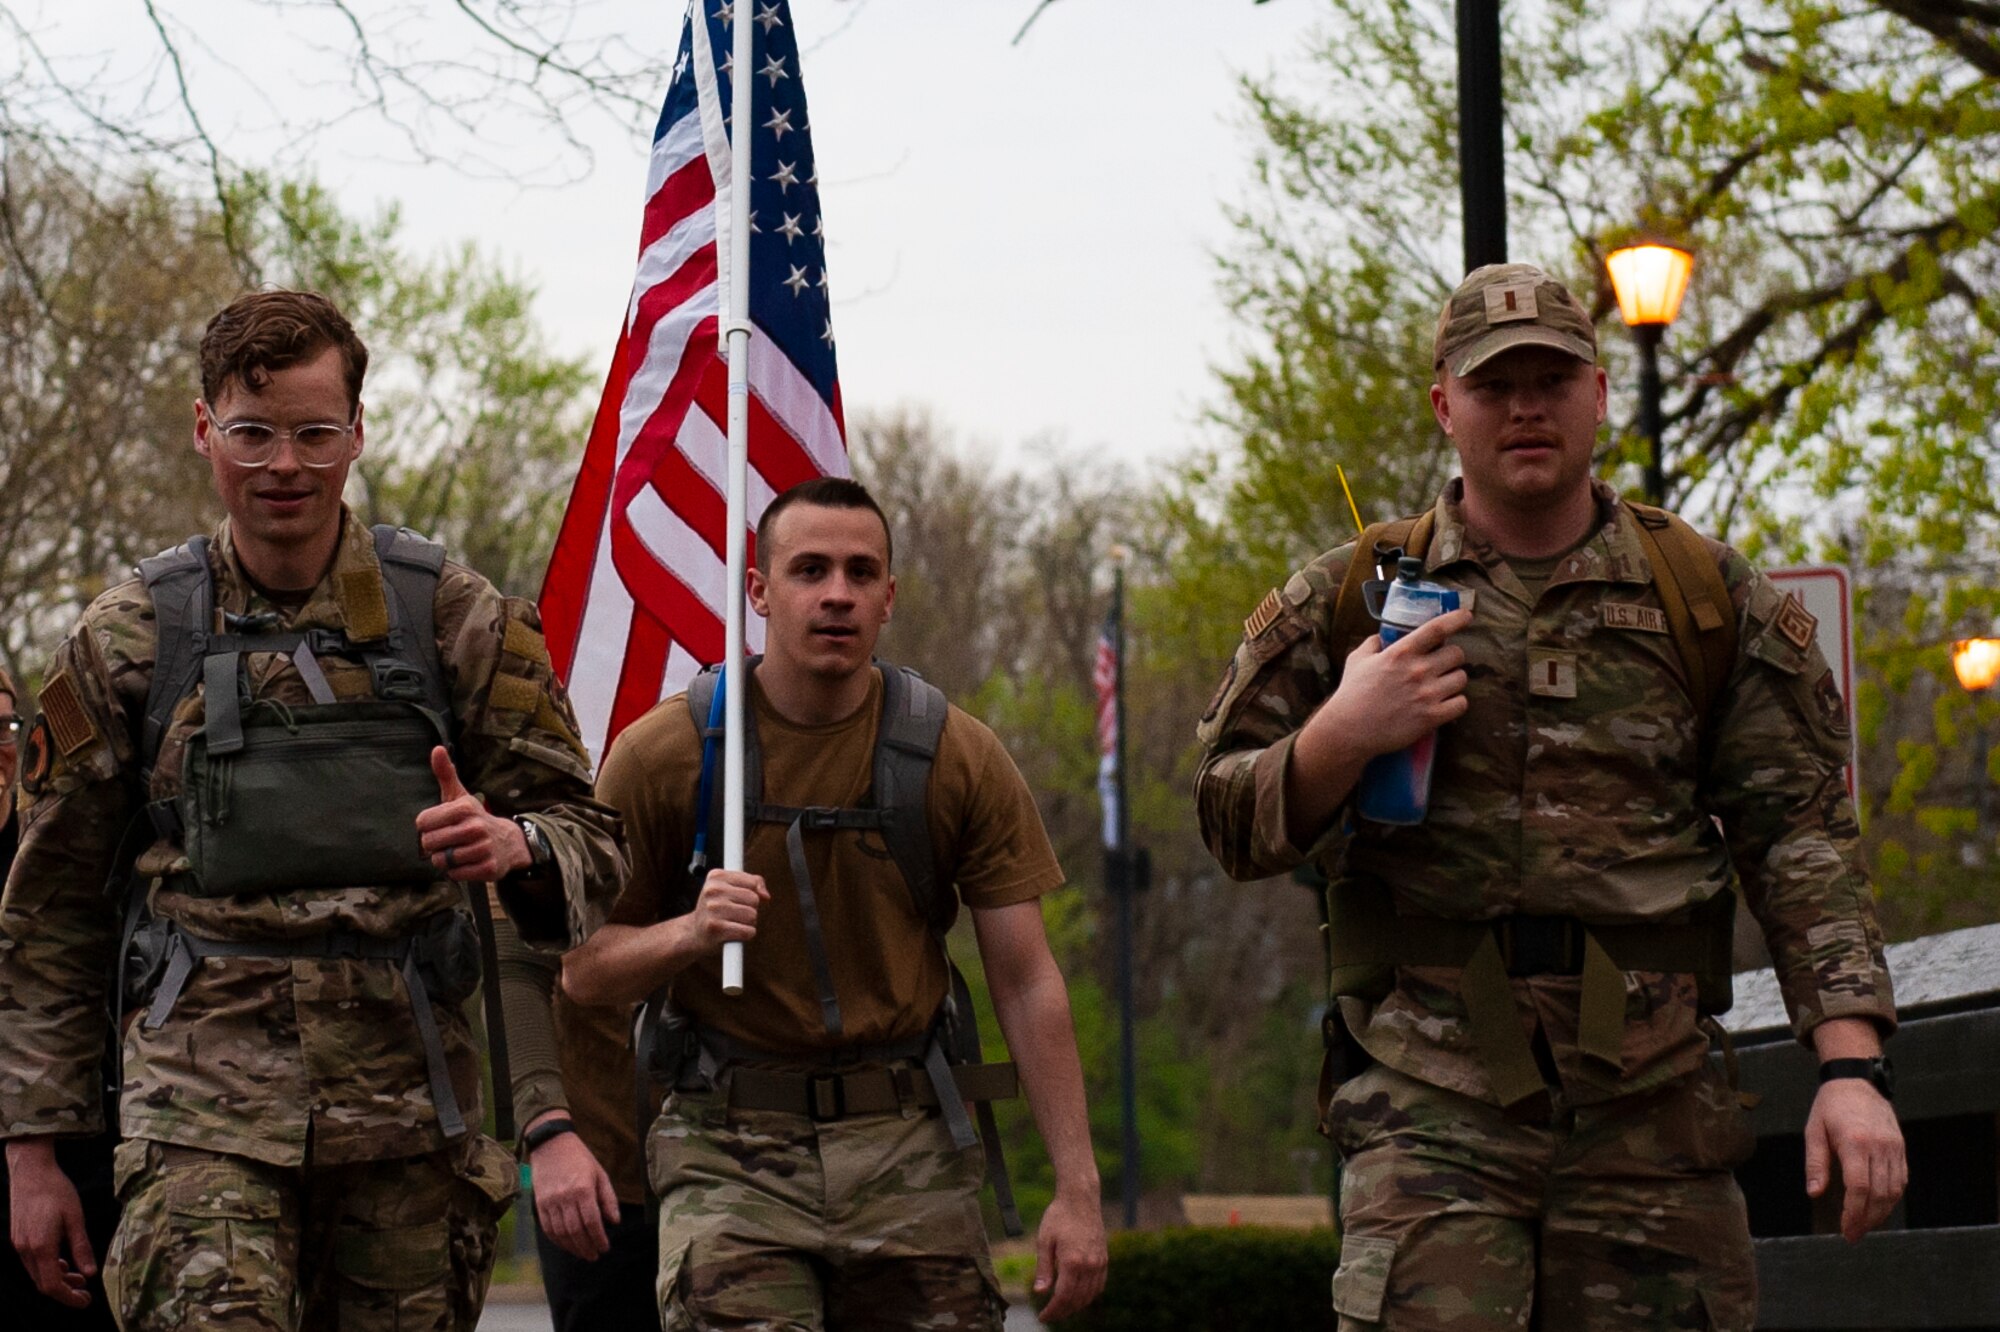 U.S. Air Force Technical Sgt. Kyle Townshend (left), a member of the Signals Analysis Squadron, National Air and Space Intelligence Center, gives a thumbs-up as he and approximately 30 others from NASIC make their way along the 30-mile Bataan Memorial Death March in Beavercreek, Ohio, April 14, 2023. Townshend, who organized the event, said he would have marched the full-marathon distance by himself, but was immensely grateful to do it instead with the 30 participants who showed up this year.